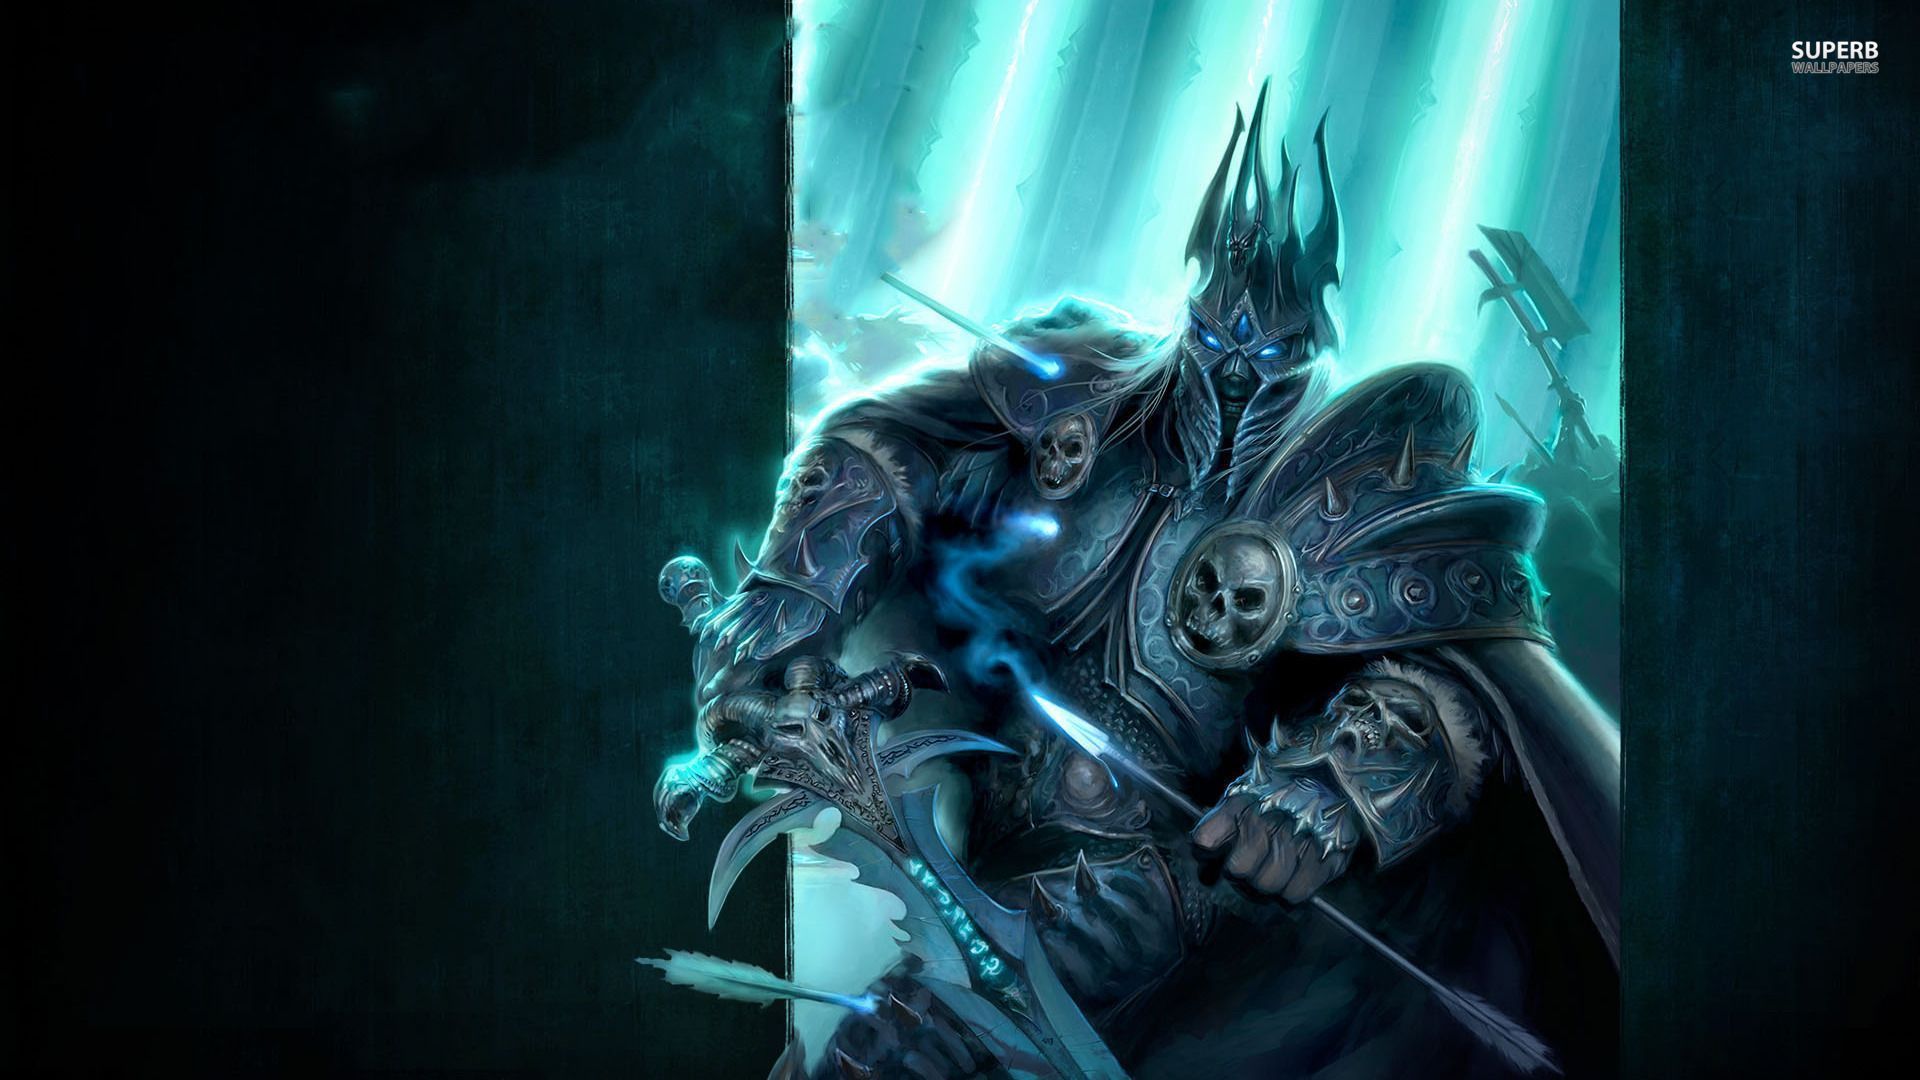 World of Warcraft: Wrath of the Lich King wallpaper - Game ...